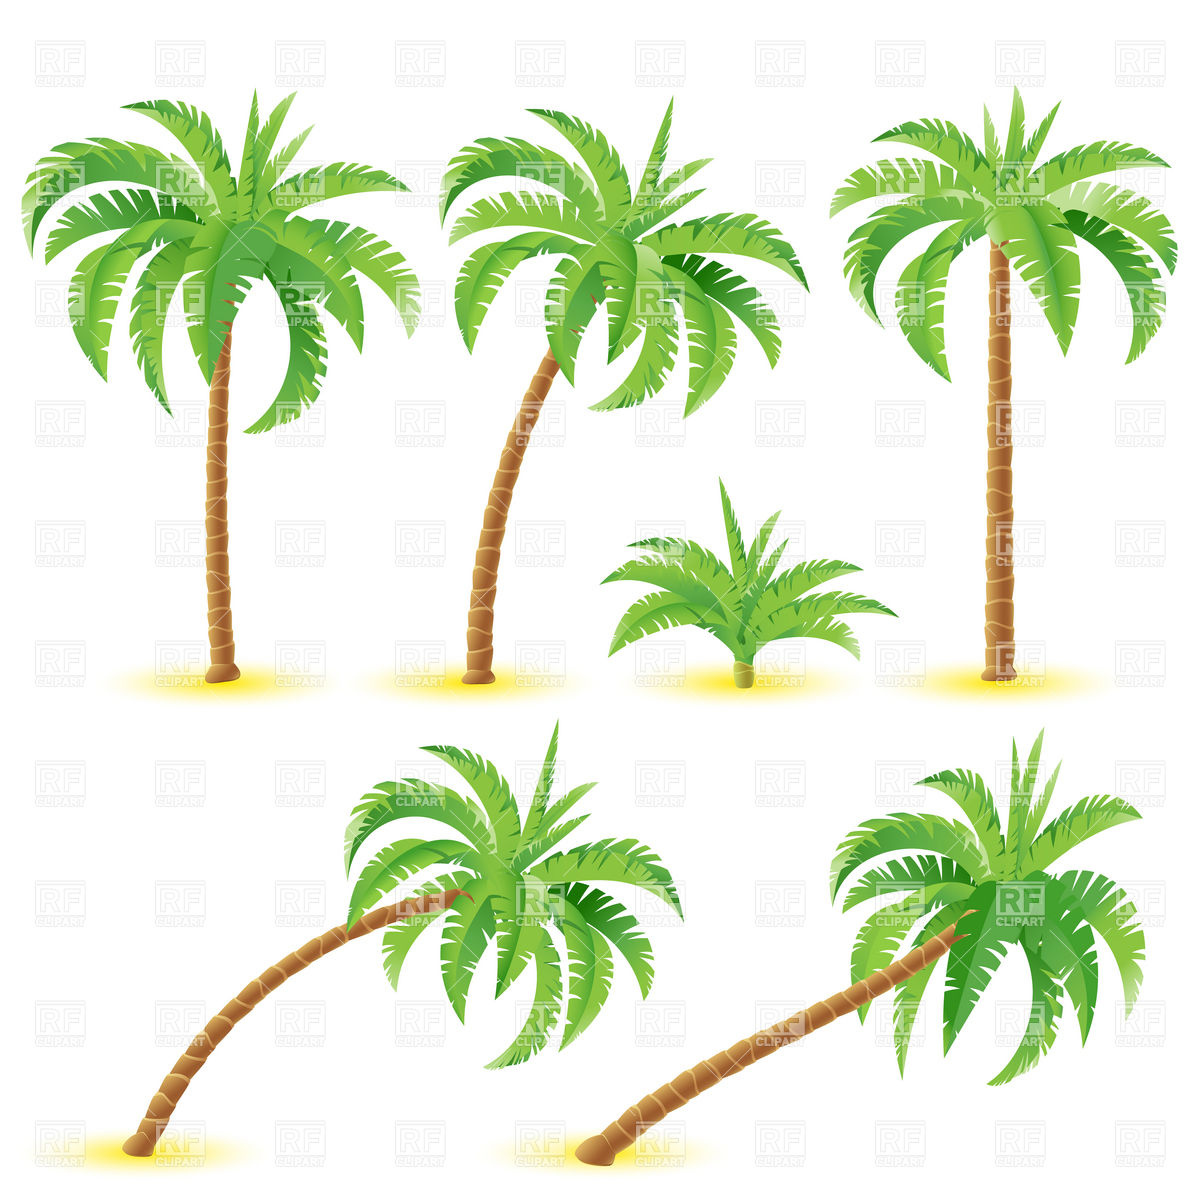 Coconut Palm Tree Clip Art Coconut Palm In Different